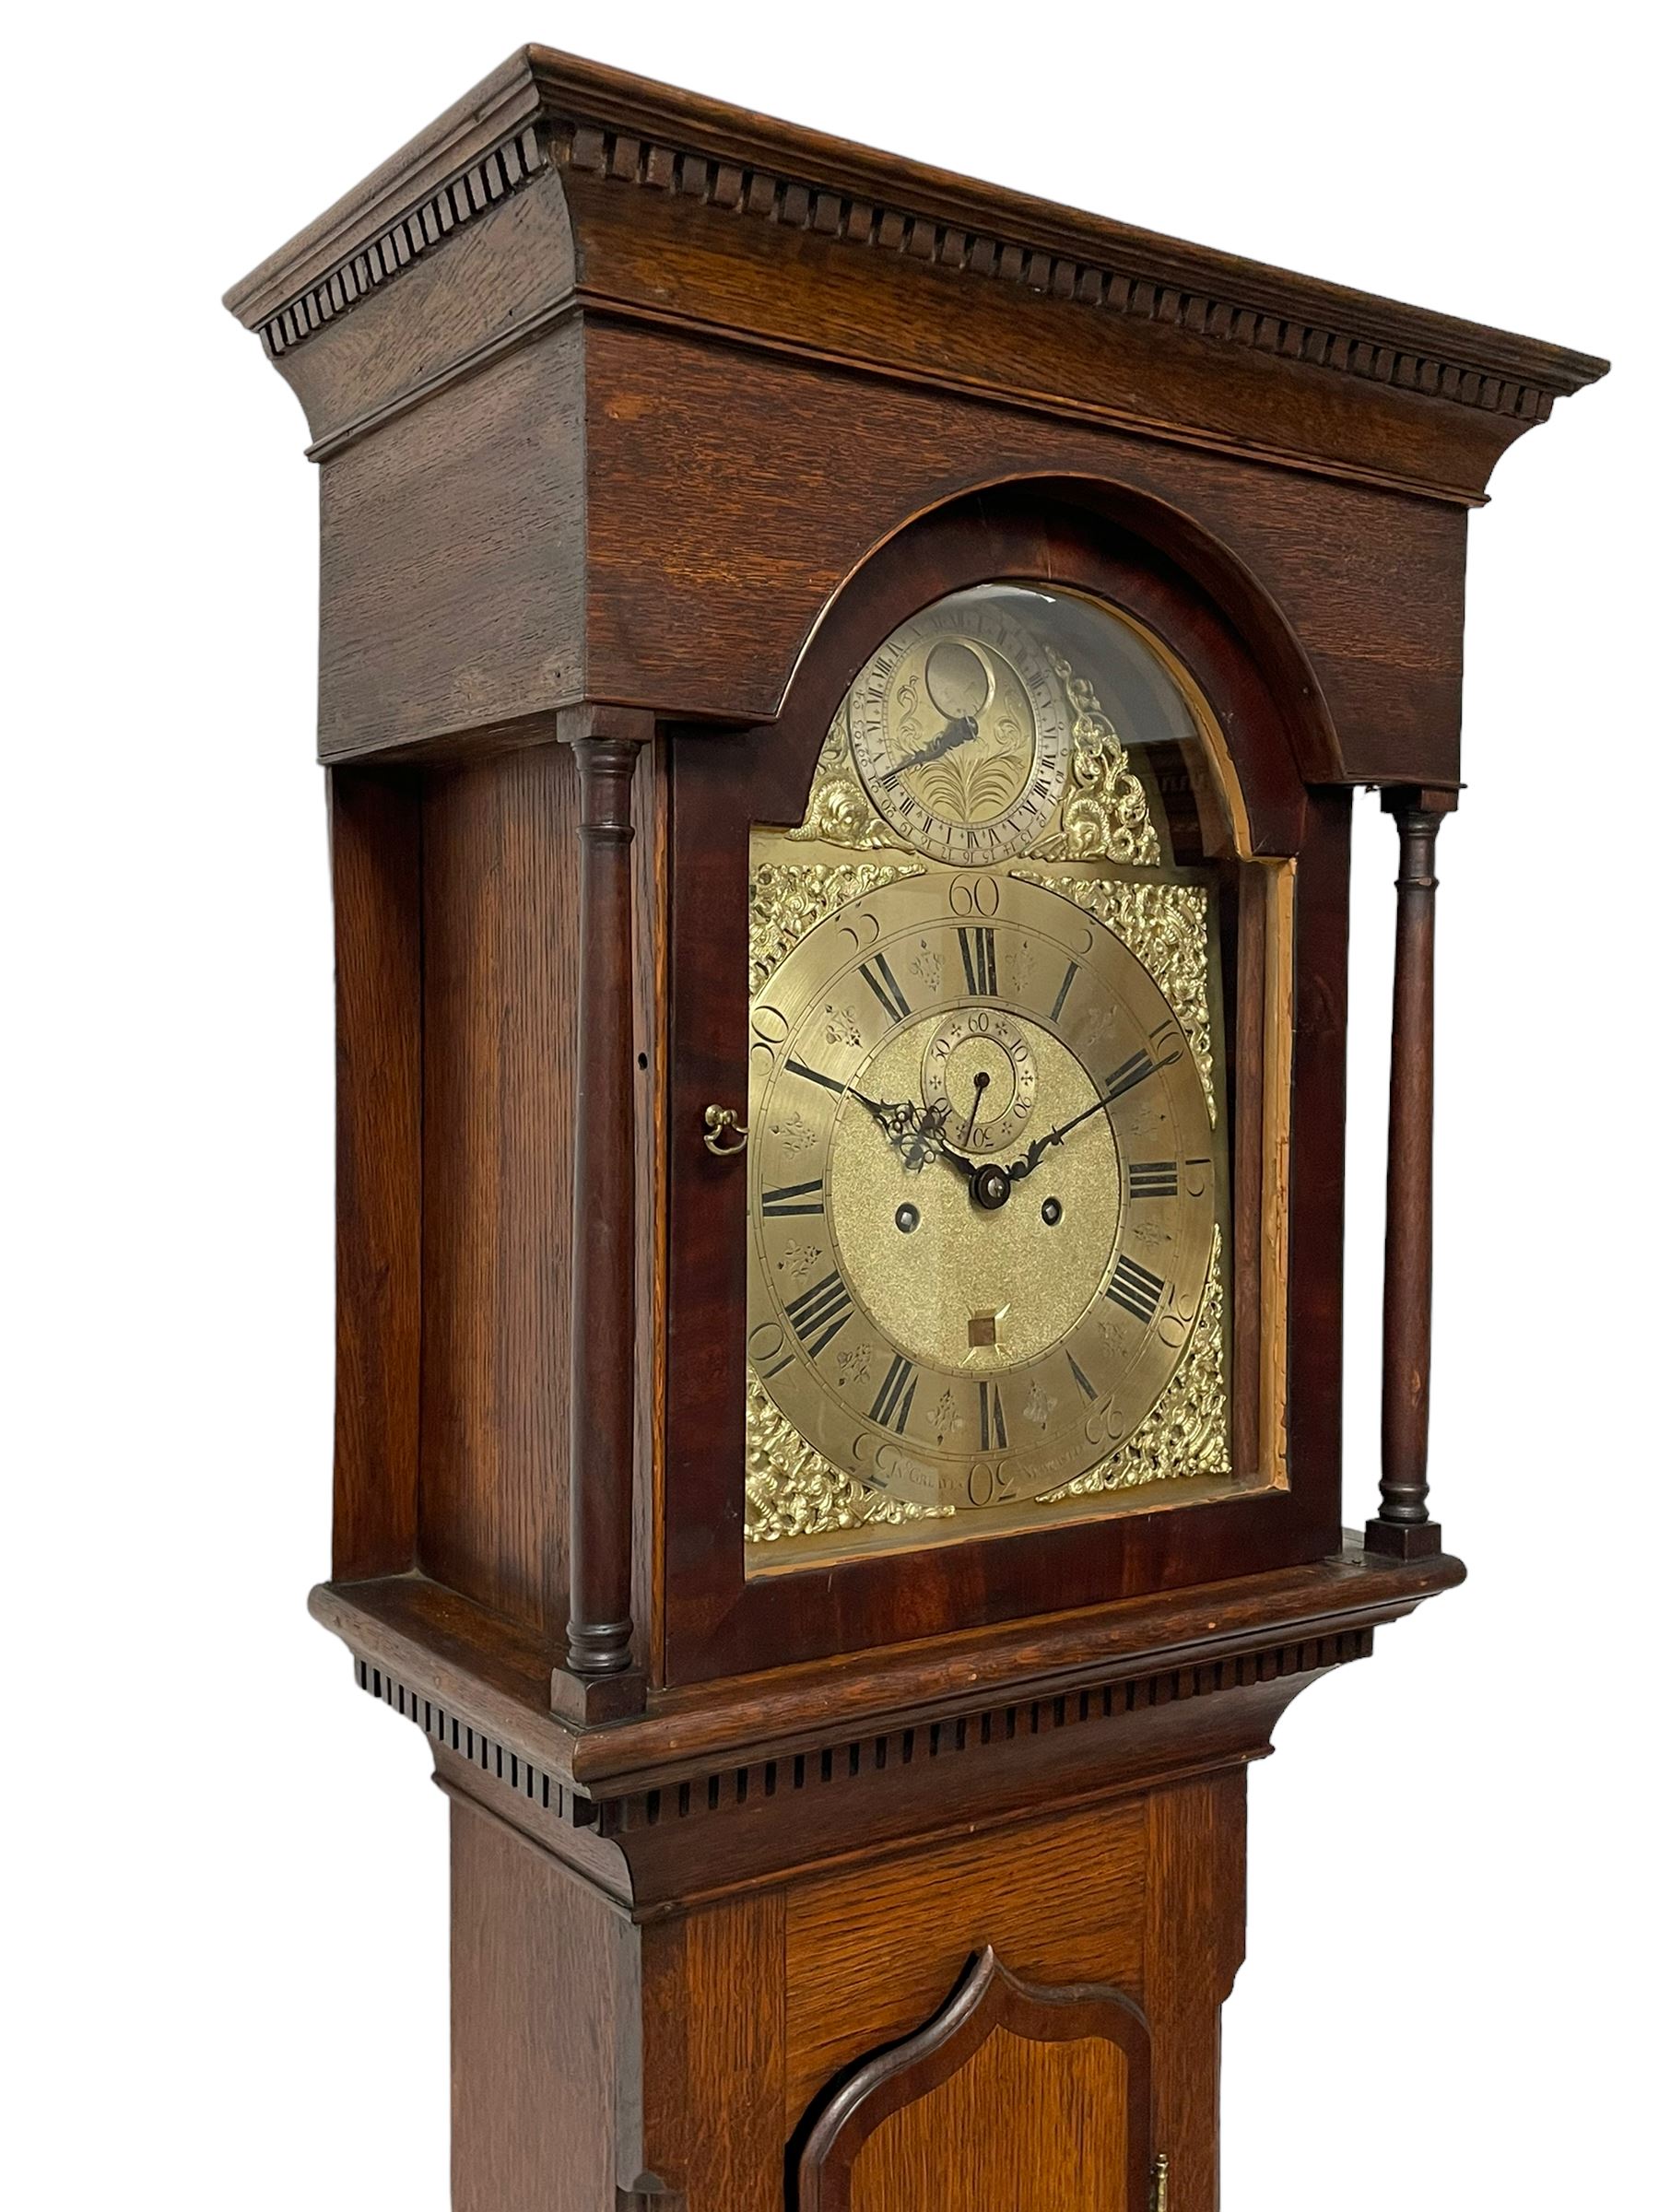 John Greaves of Newcastle - Mid-18th century 8-day oak longcase clock with a flat top - Image 6 of 12